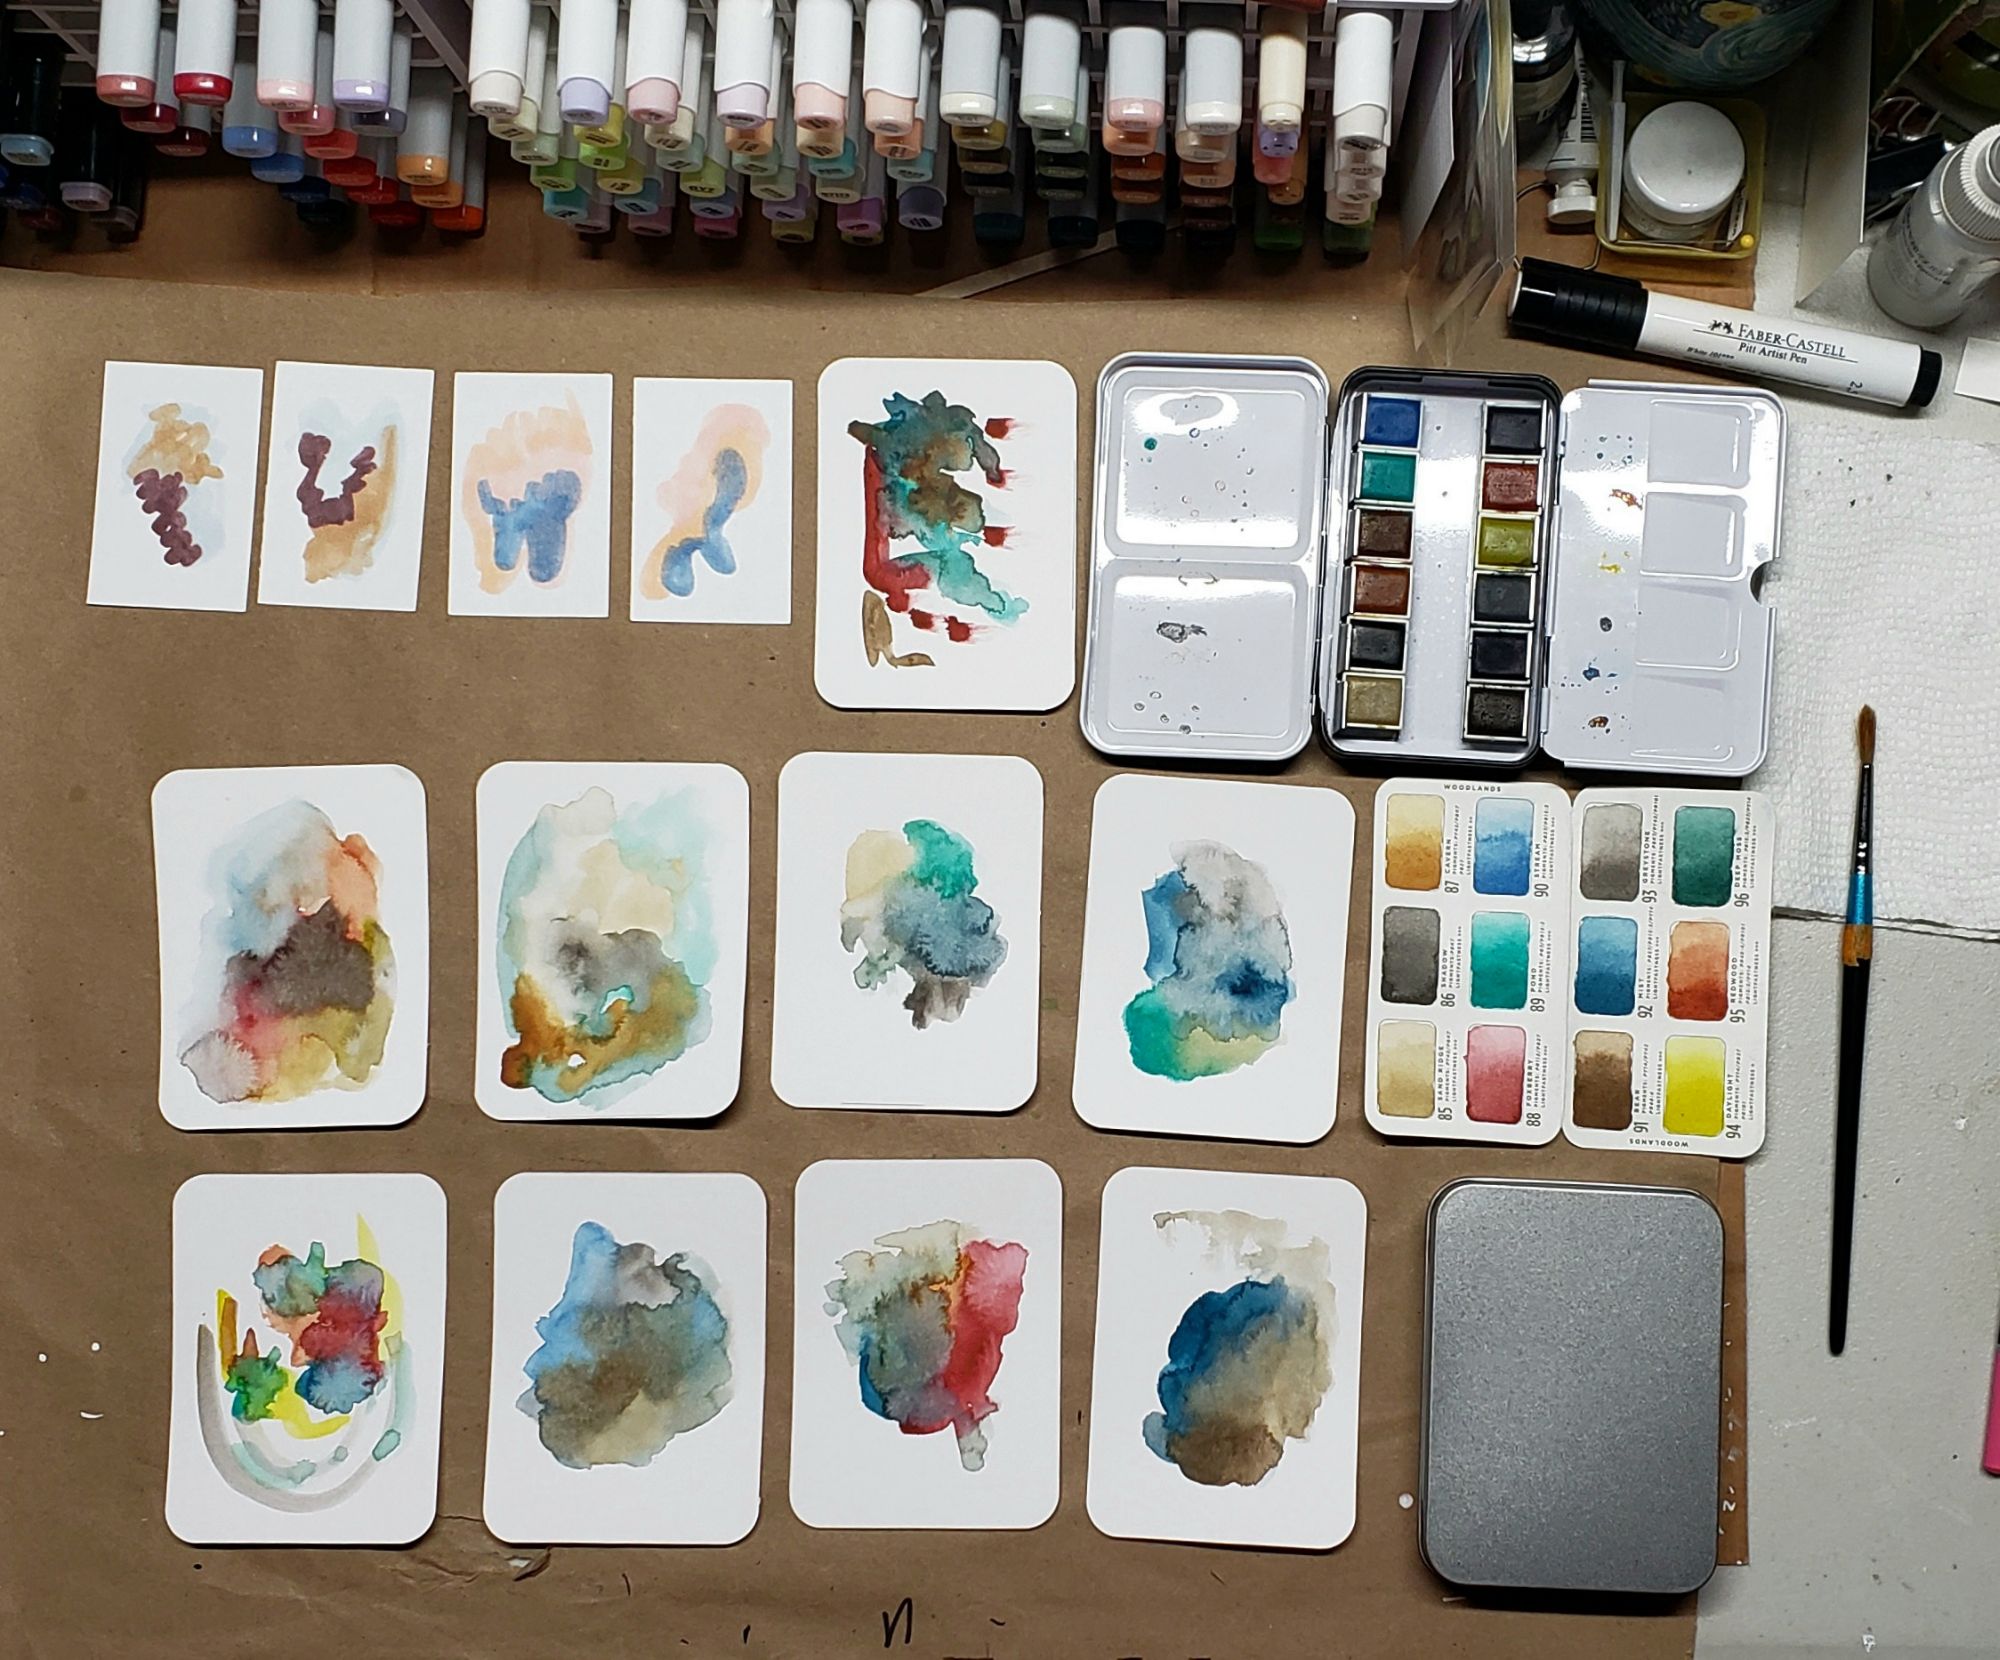 Watercolor Splotches on Cut Oracle Deck Cards